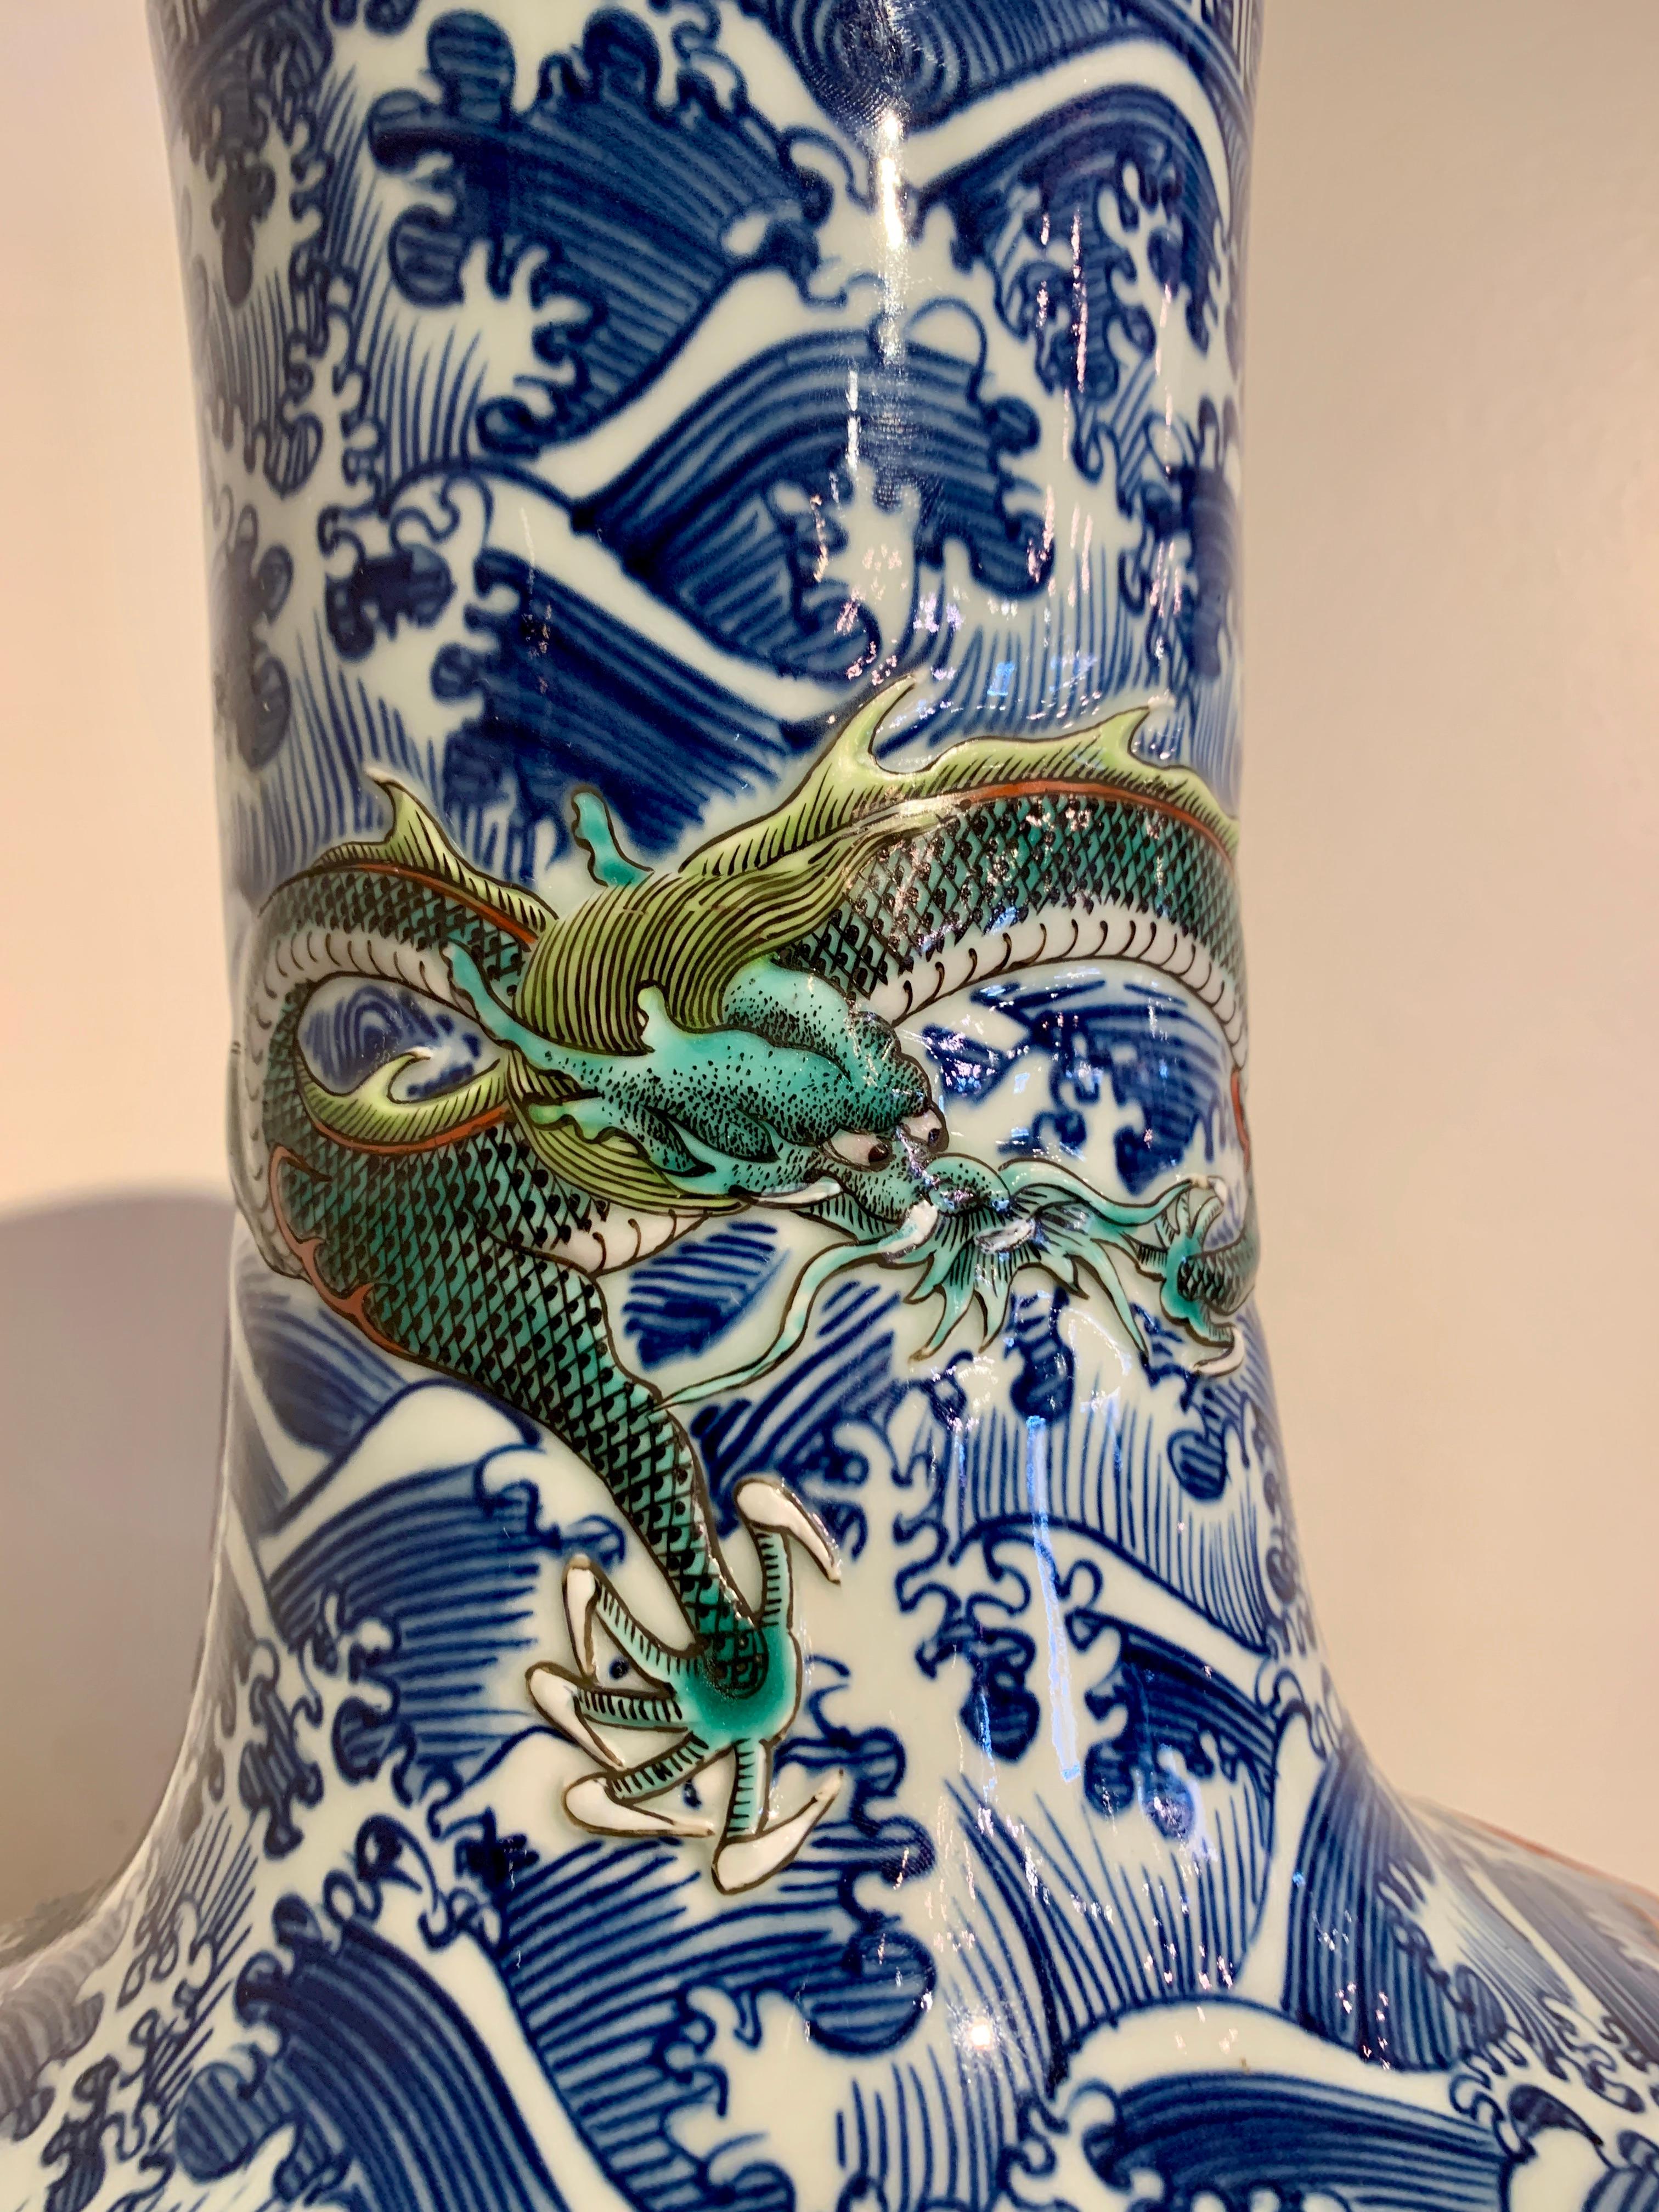 Contemporary Large Modern Chinese Porcelain Nine Dragon Vase on Wood Stand, China For Sale